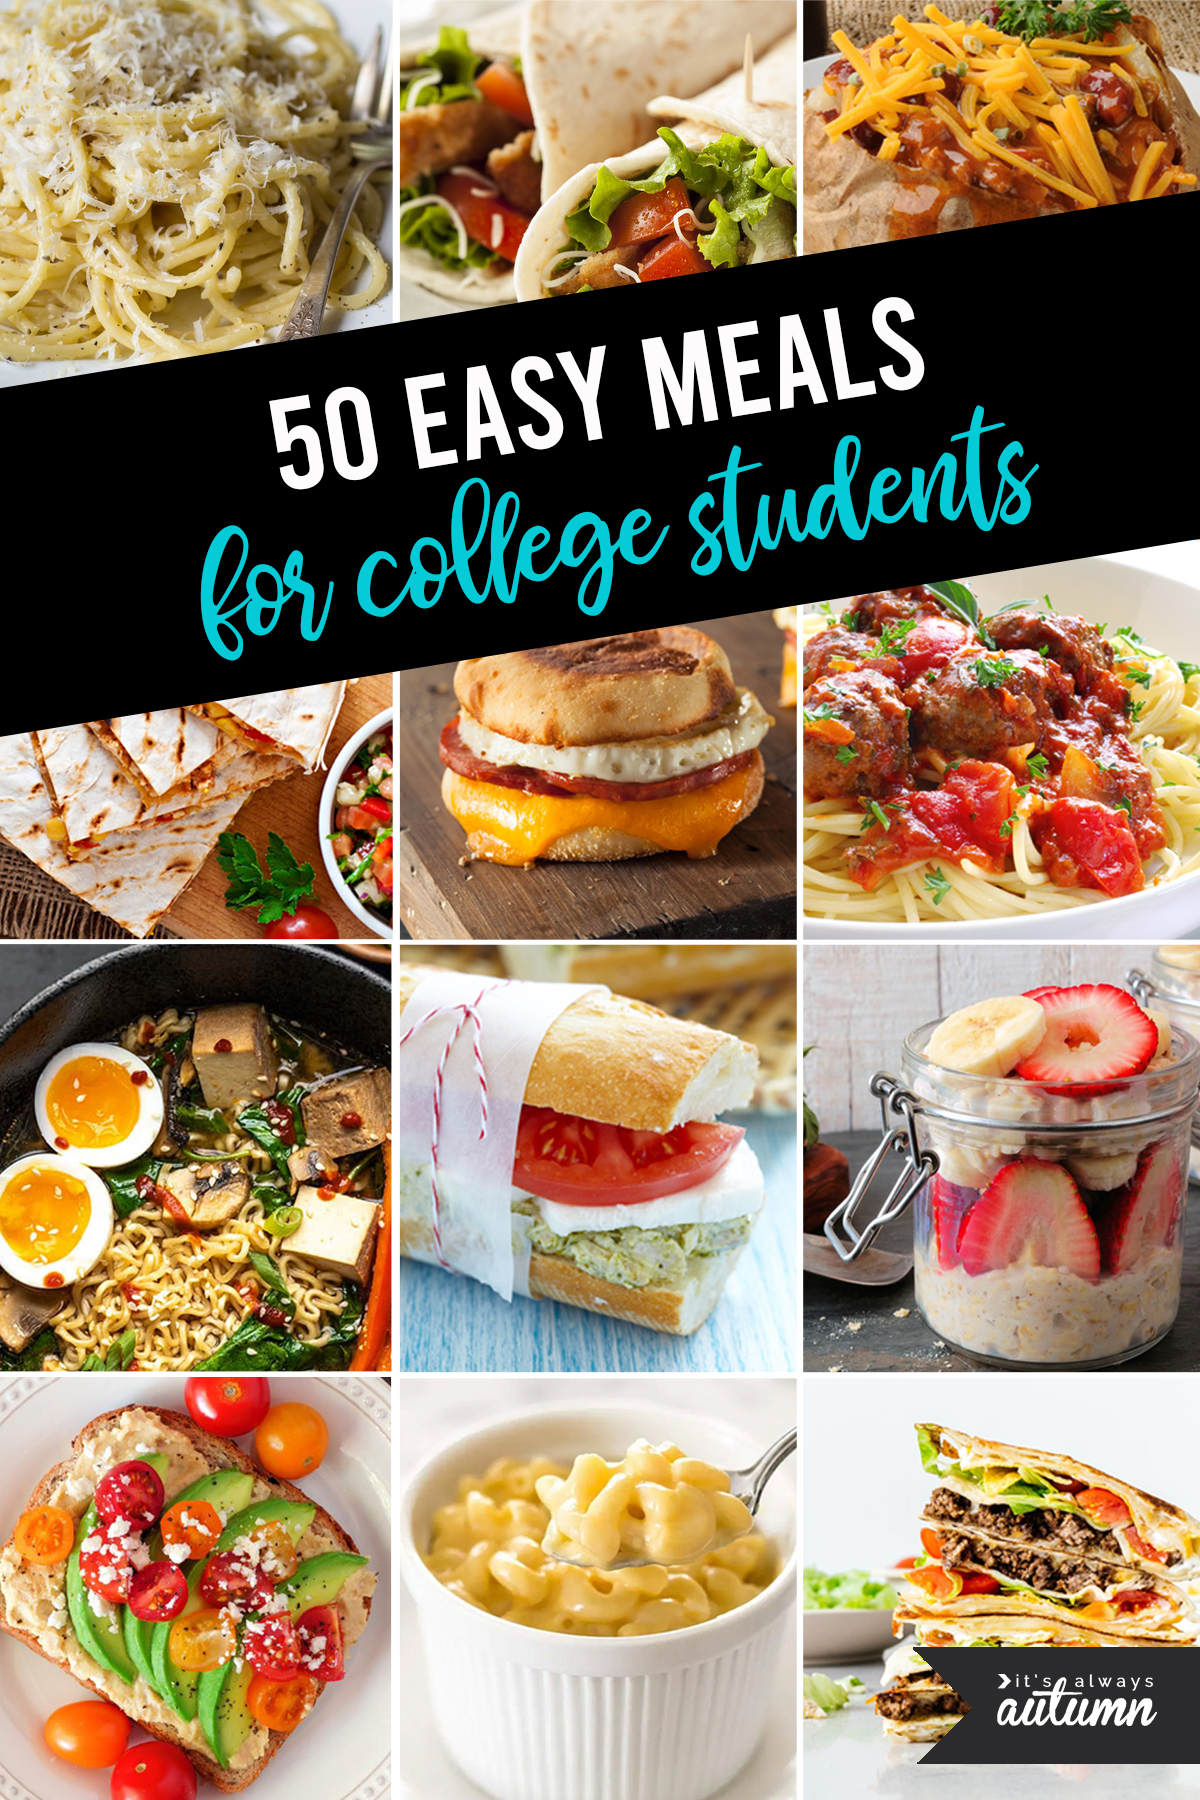 Collage pictures of easy meals; text: 50 easy meals for college students